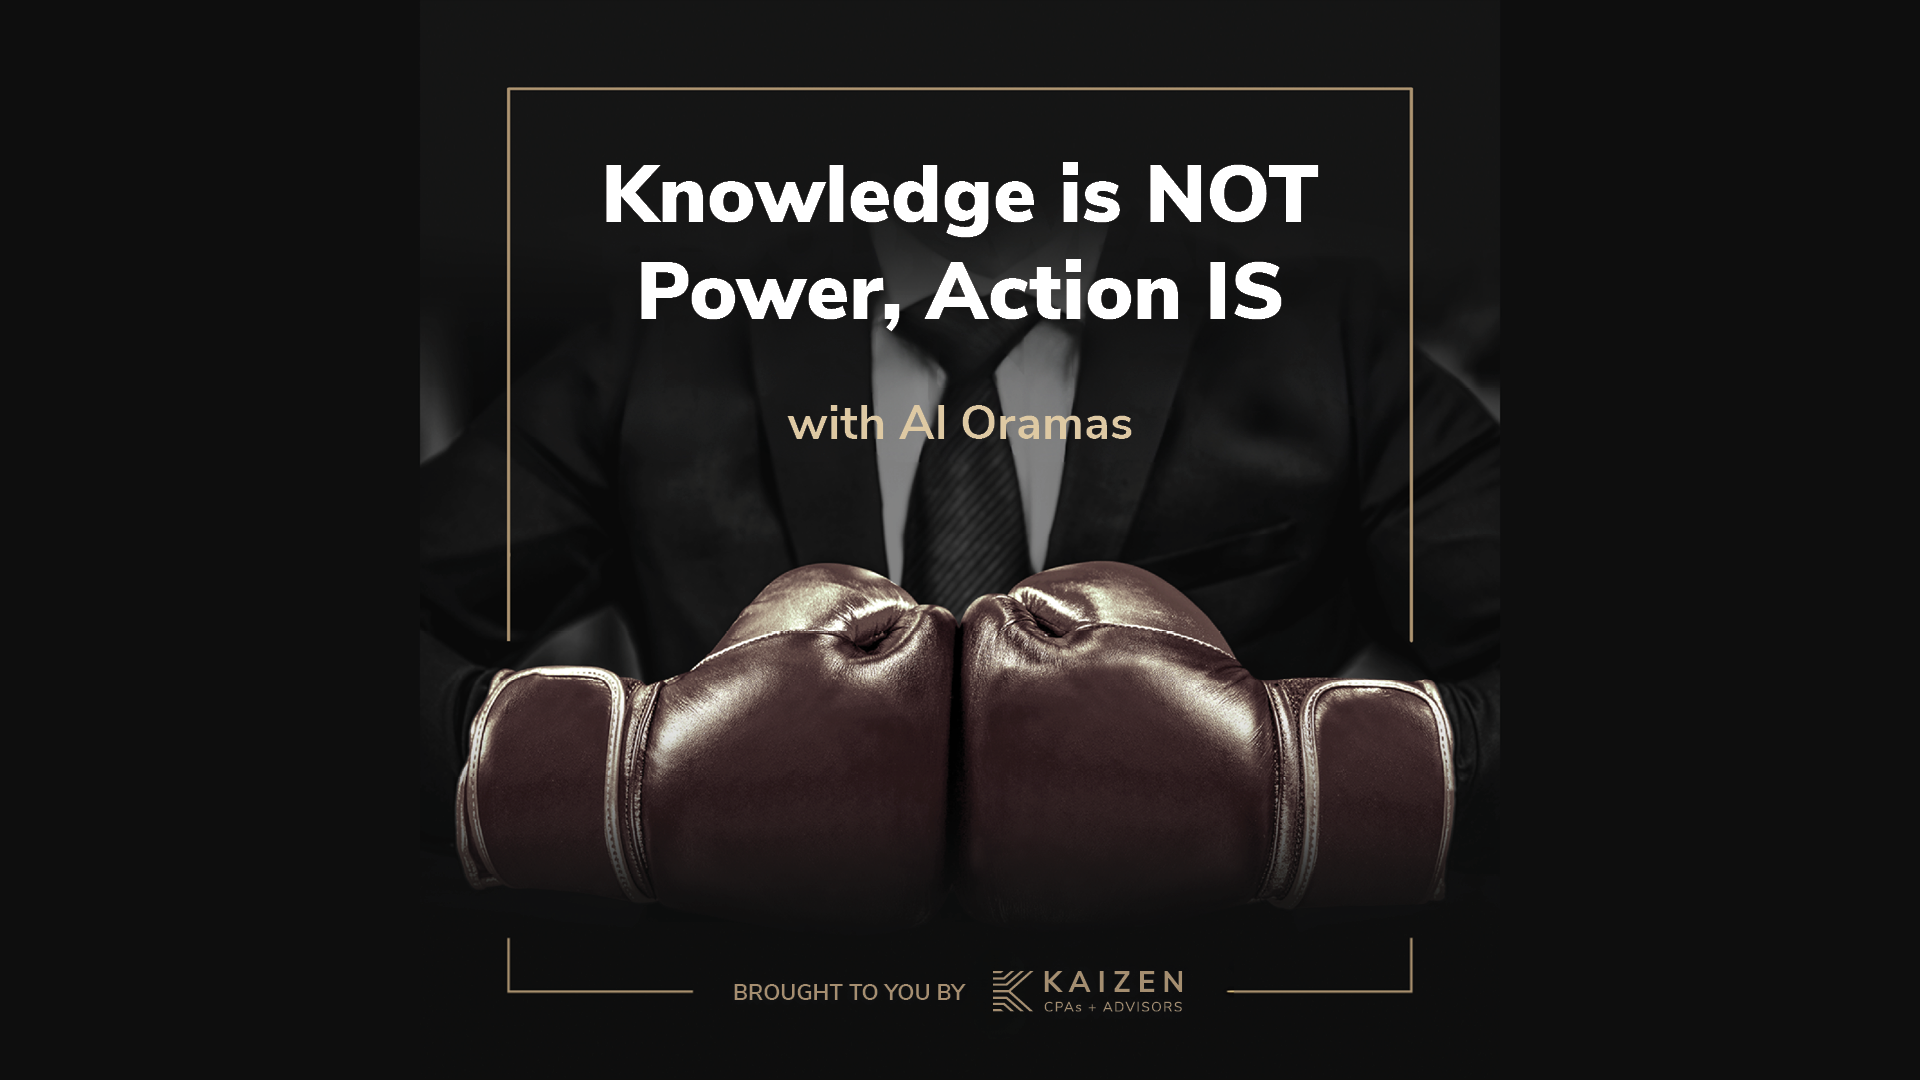 Knowledge is NOT power, Action IS